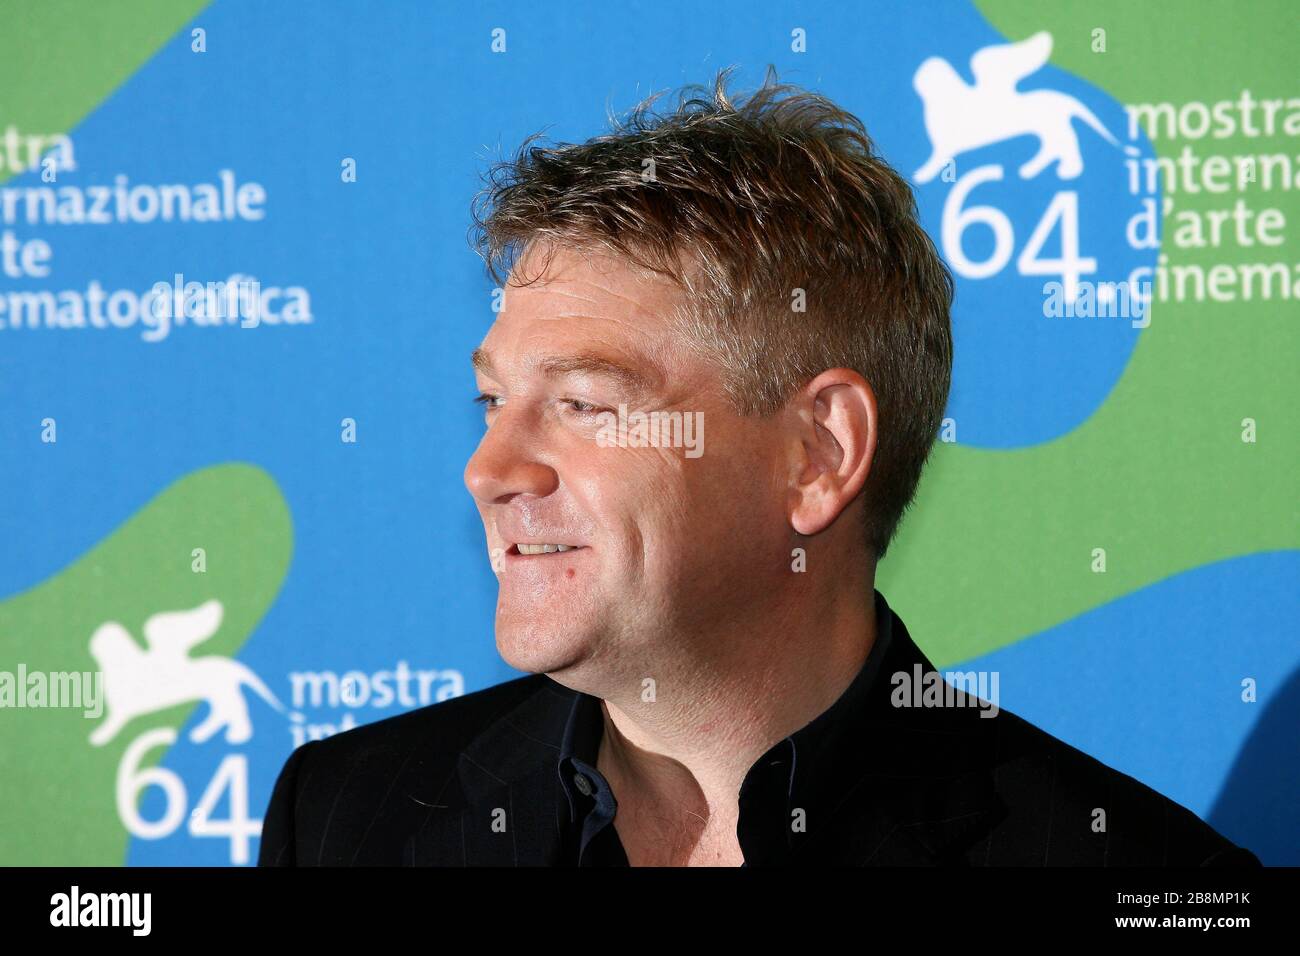 Venice, 30/08/2007. Kenneth Branagh attending the photocall for the film 'Sleuth' directed by Kenneth Branagh. Stock Photo